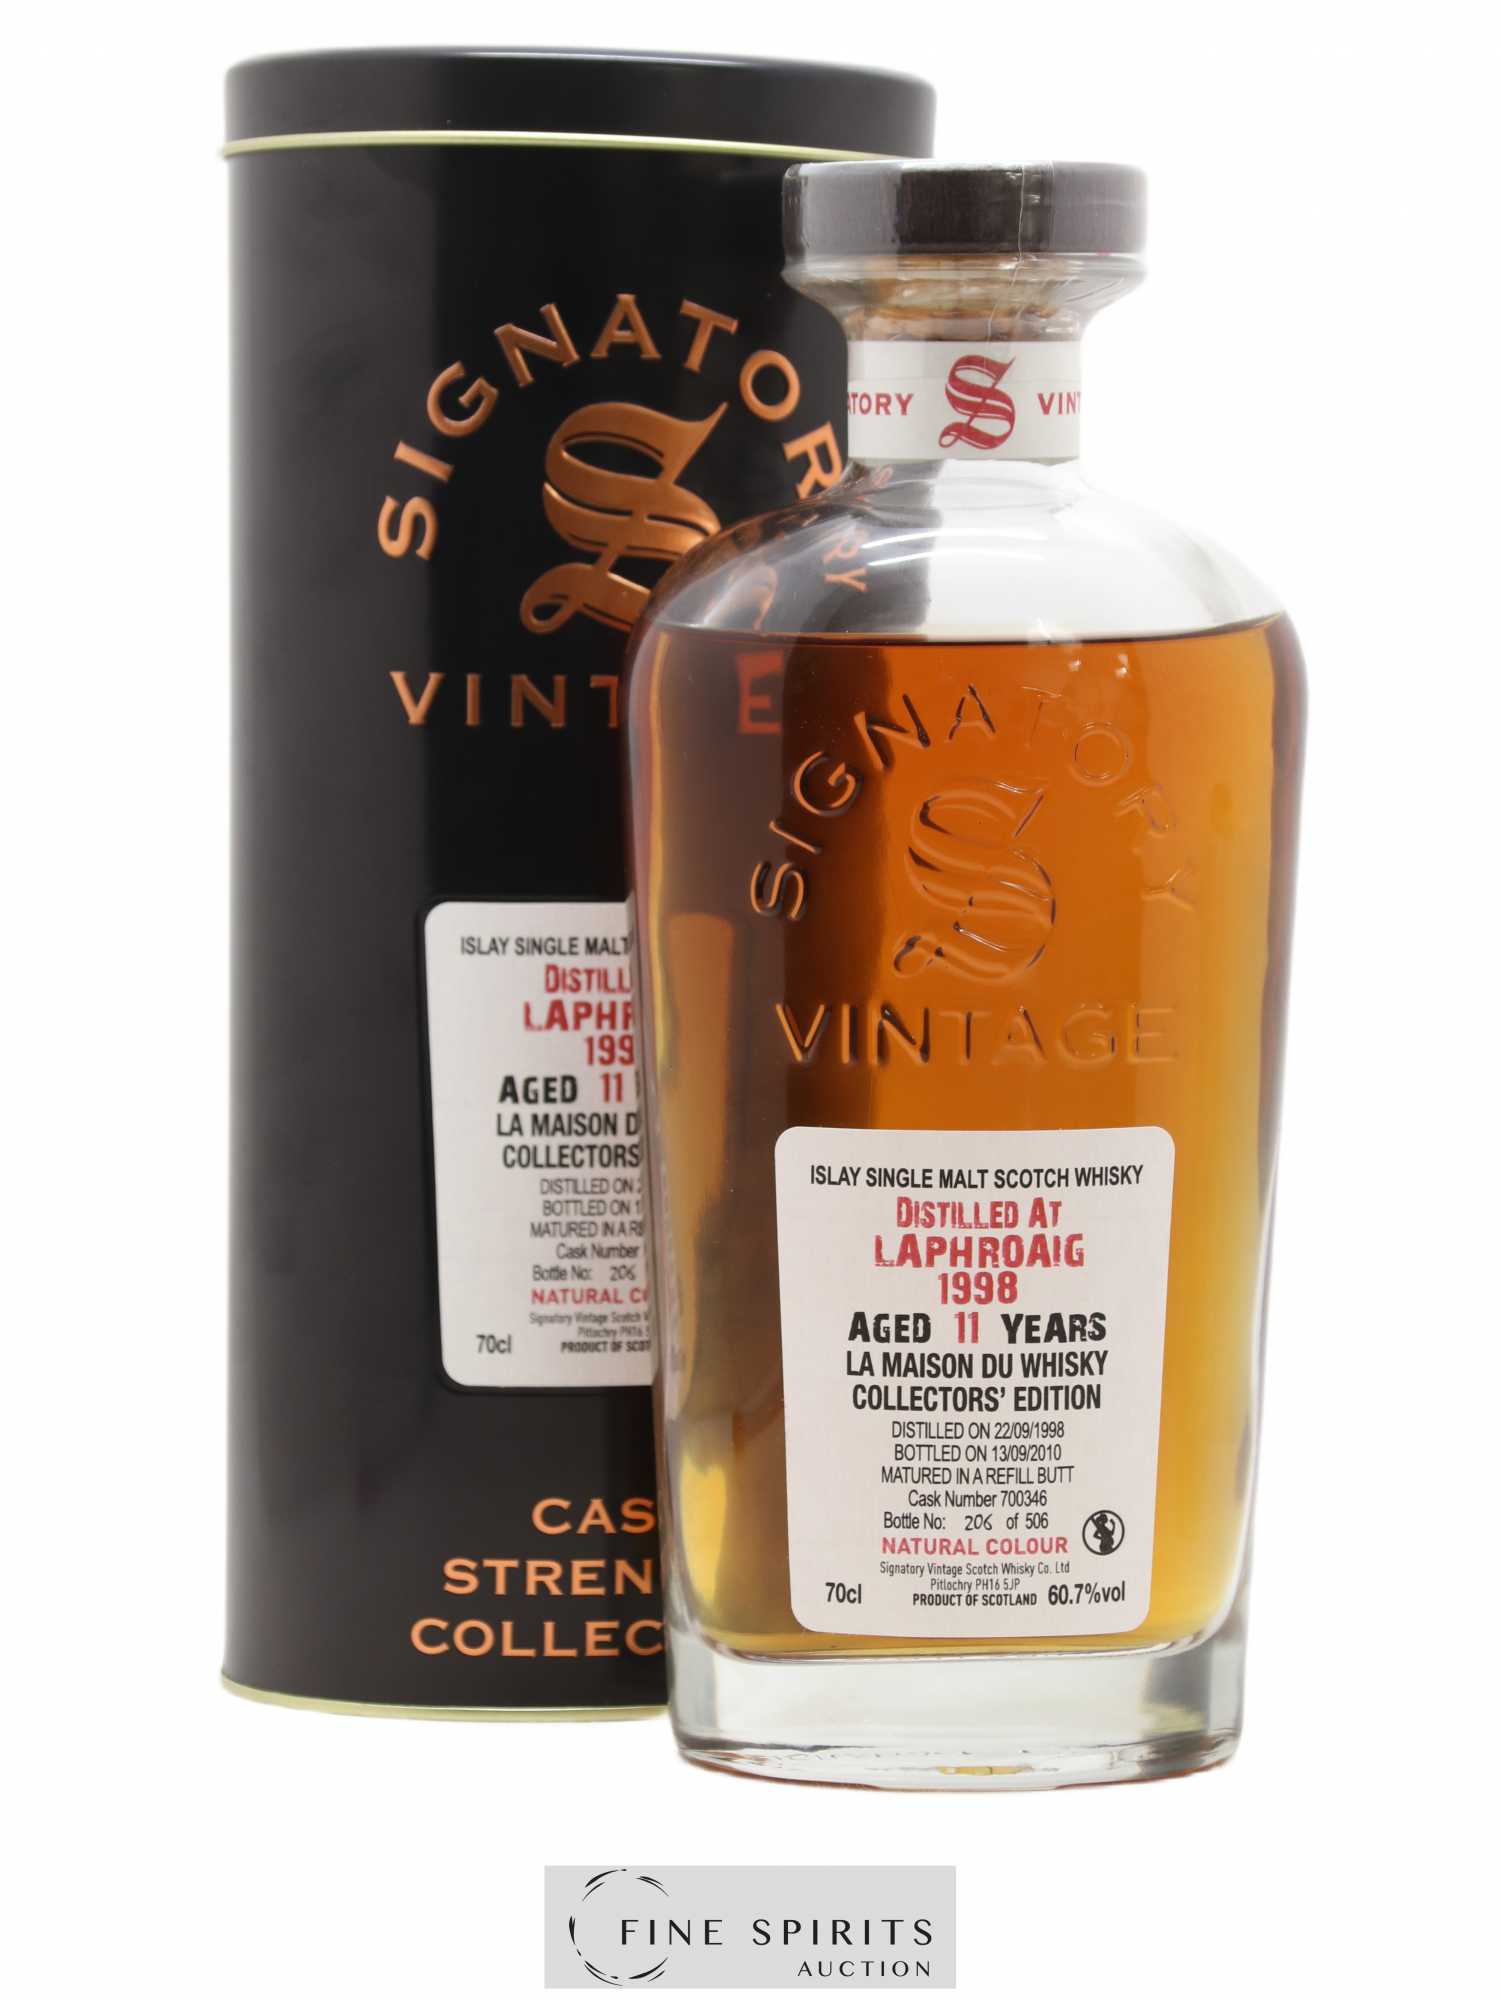 Laphroaig 11 years 1998 Signatory Vintage Collector's Edition Refill Butt n°700346 - One of 506 - bottled 2010 LMDW Cask Strength Collection 